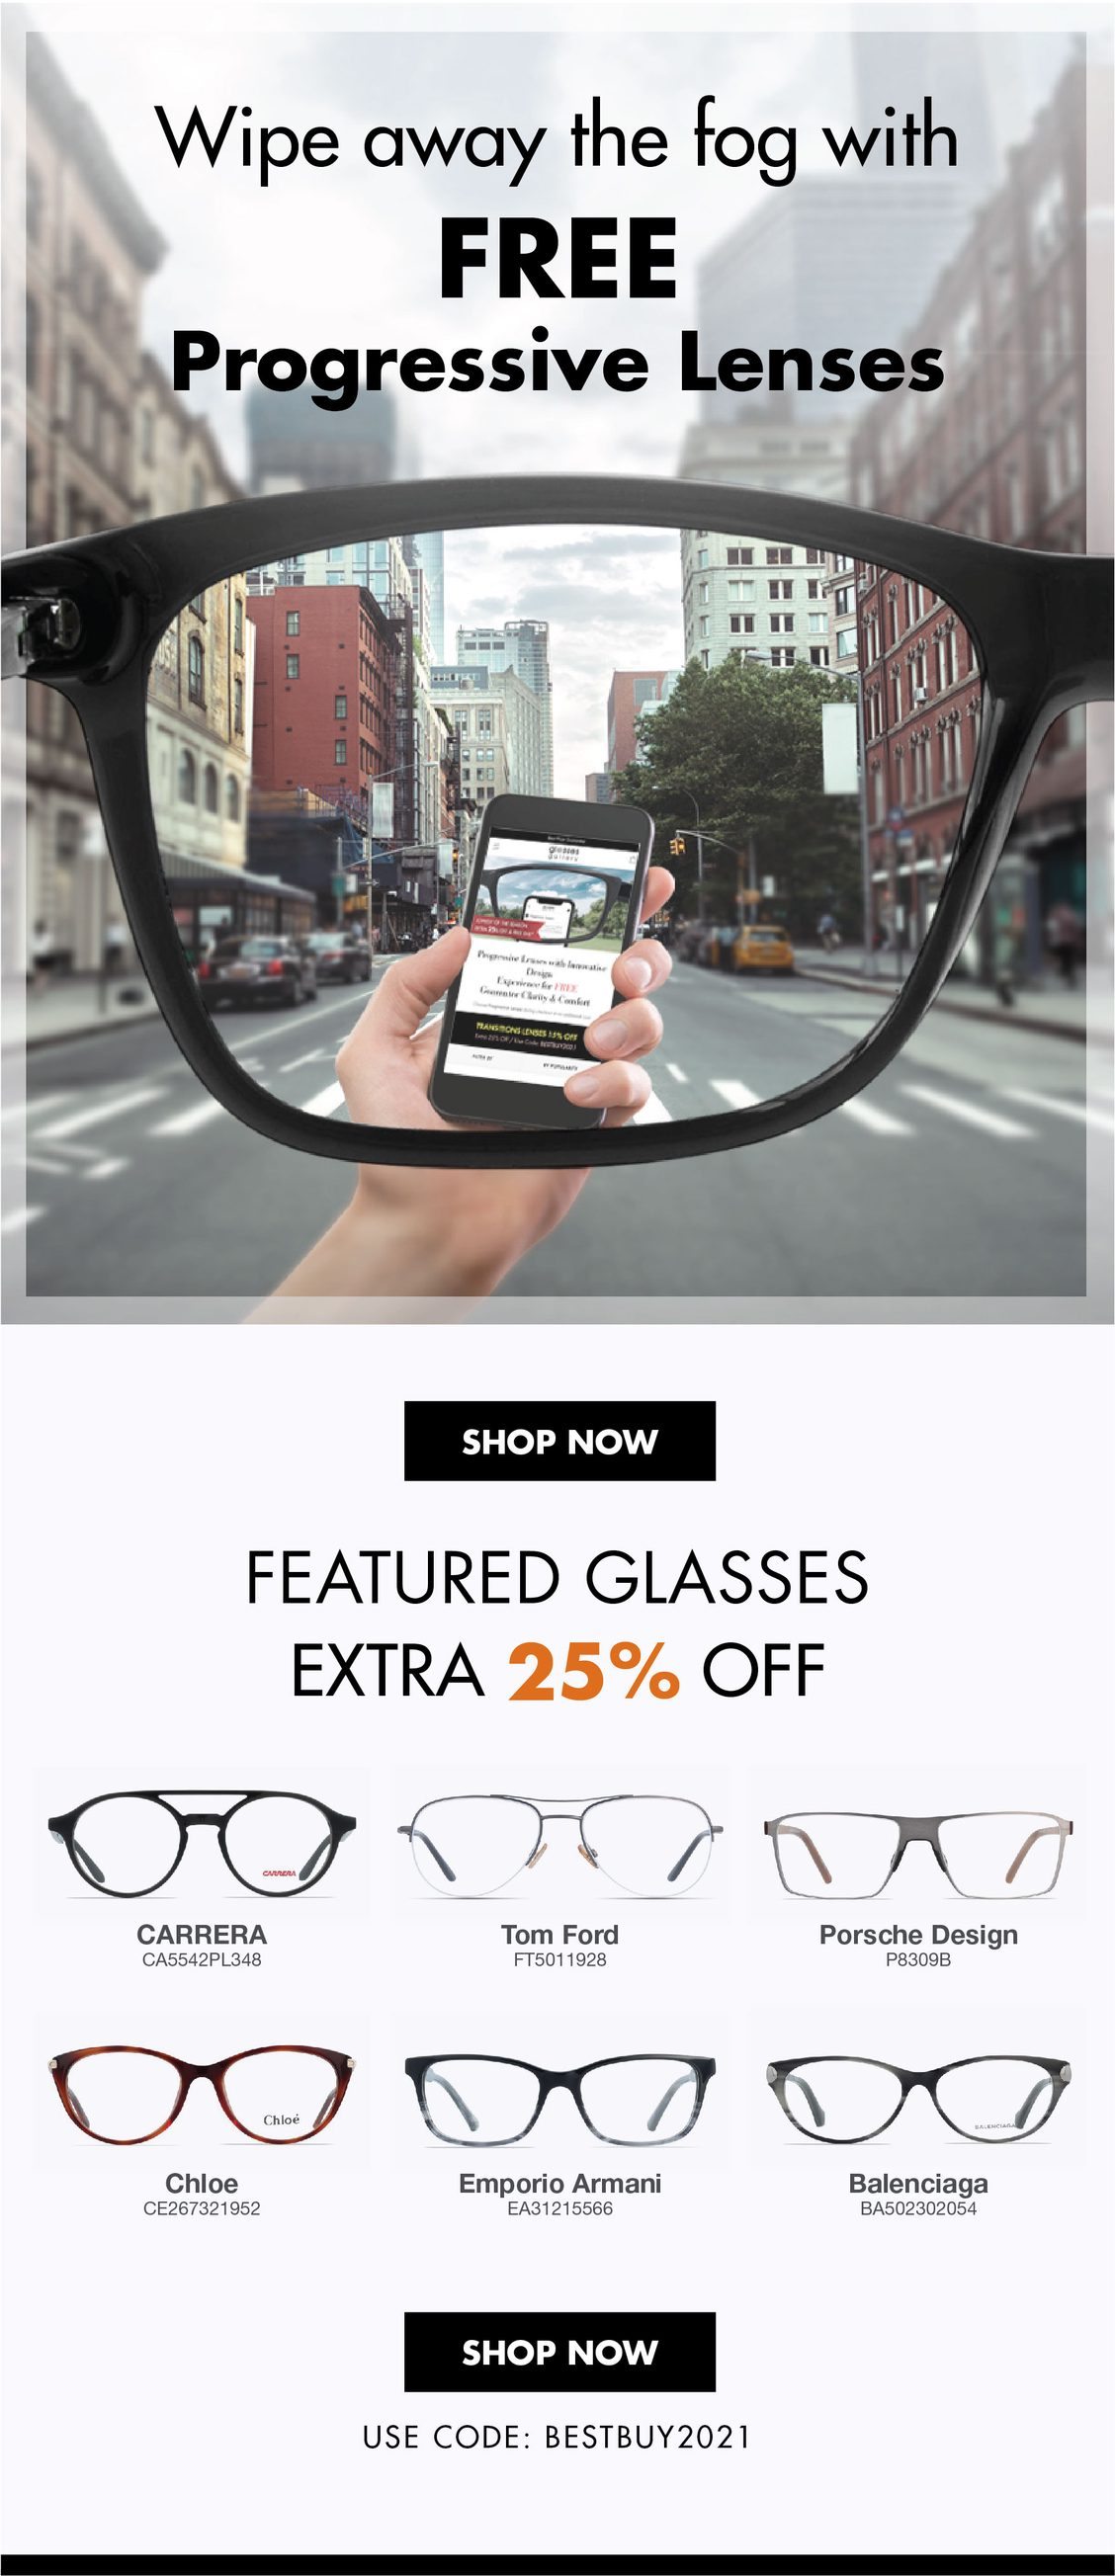 Wipe away the fog with FREE progressive lenses - GLASSES GALLERY